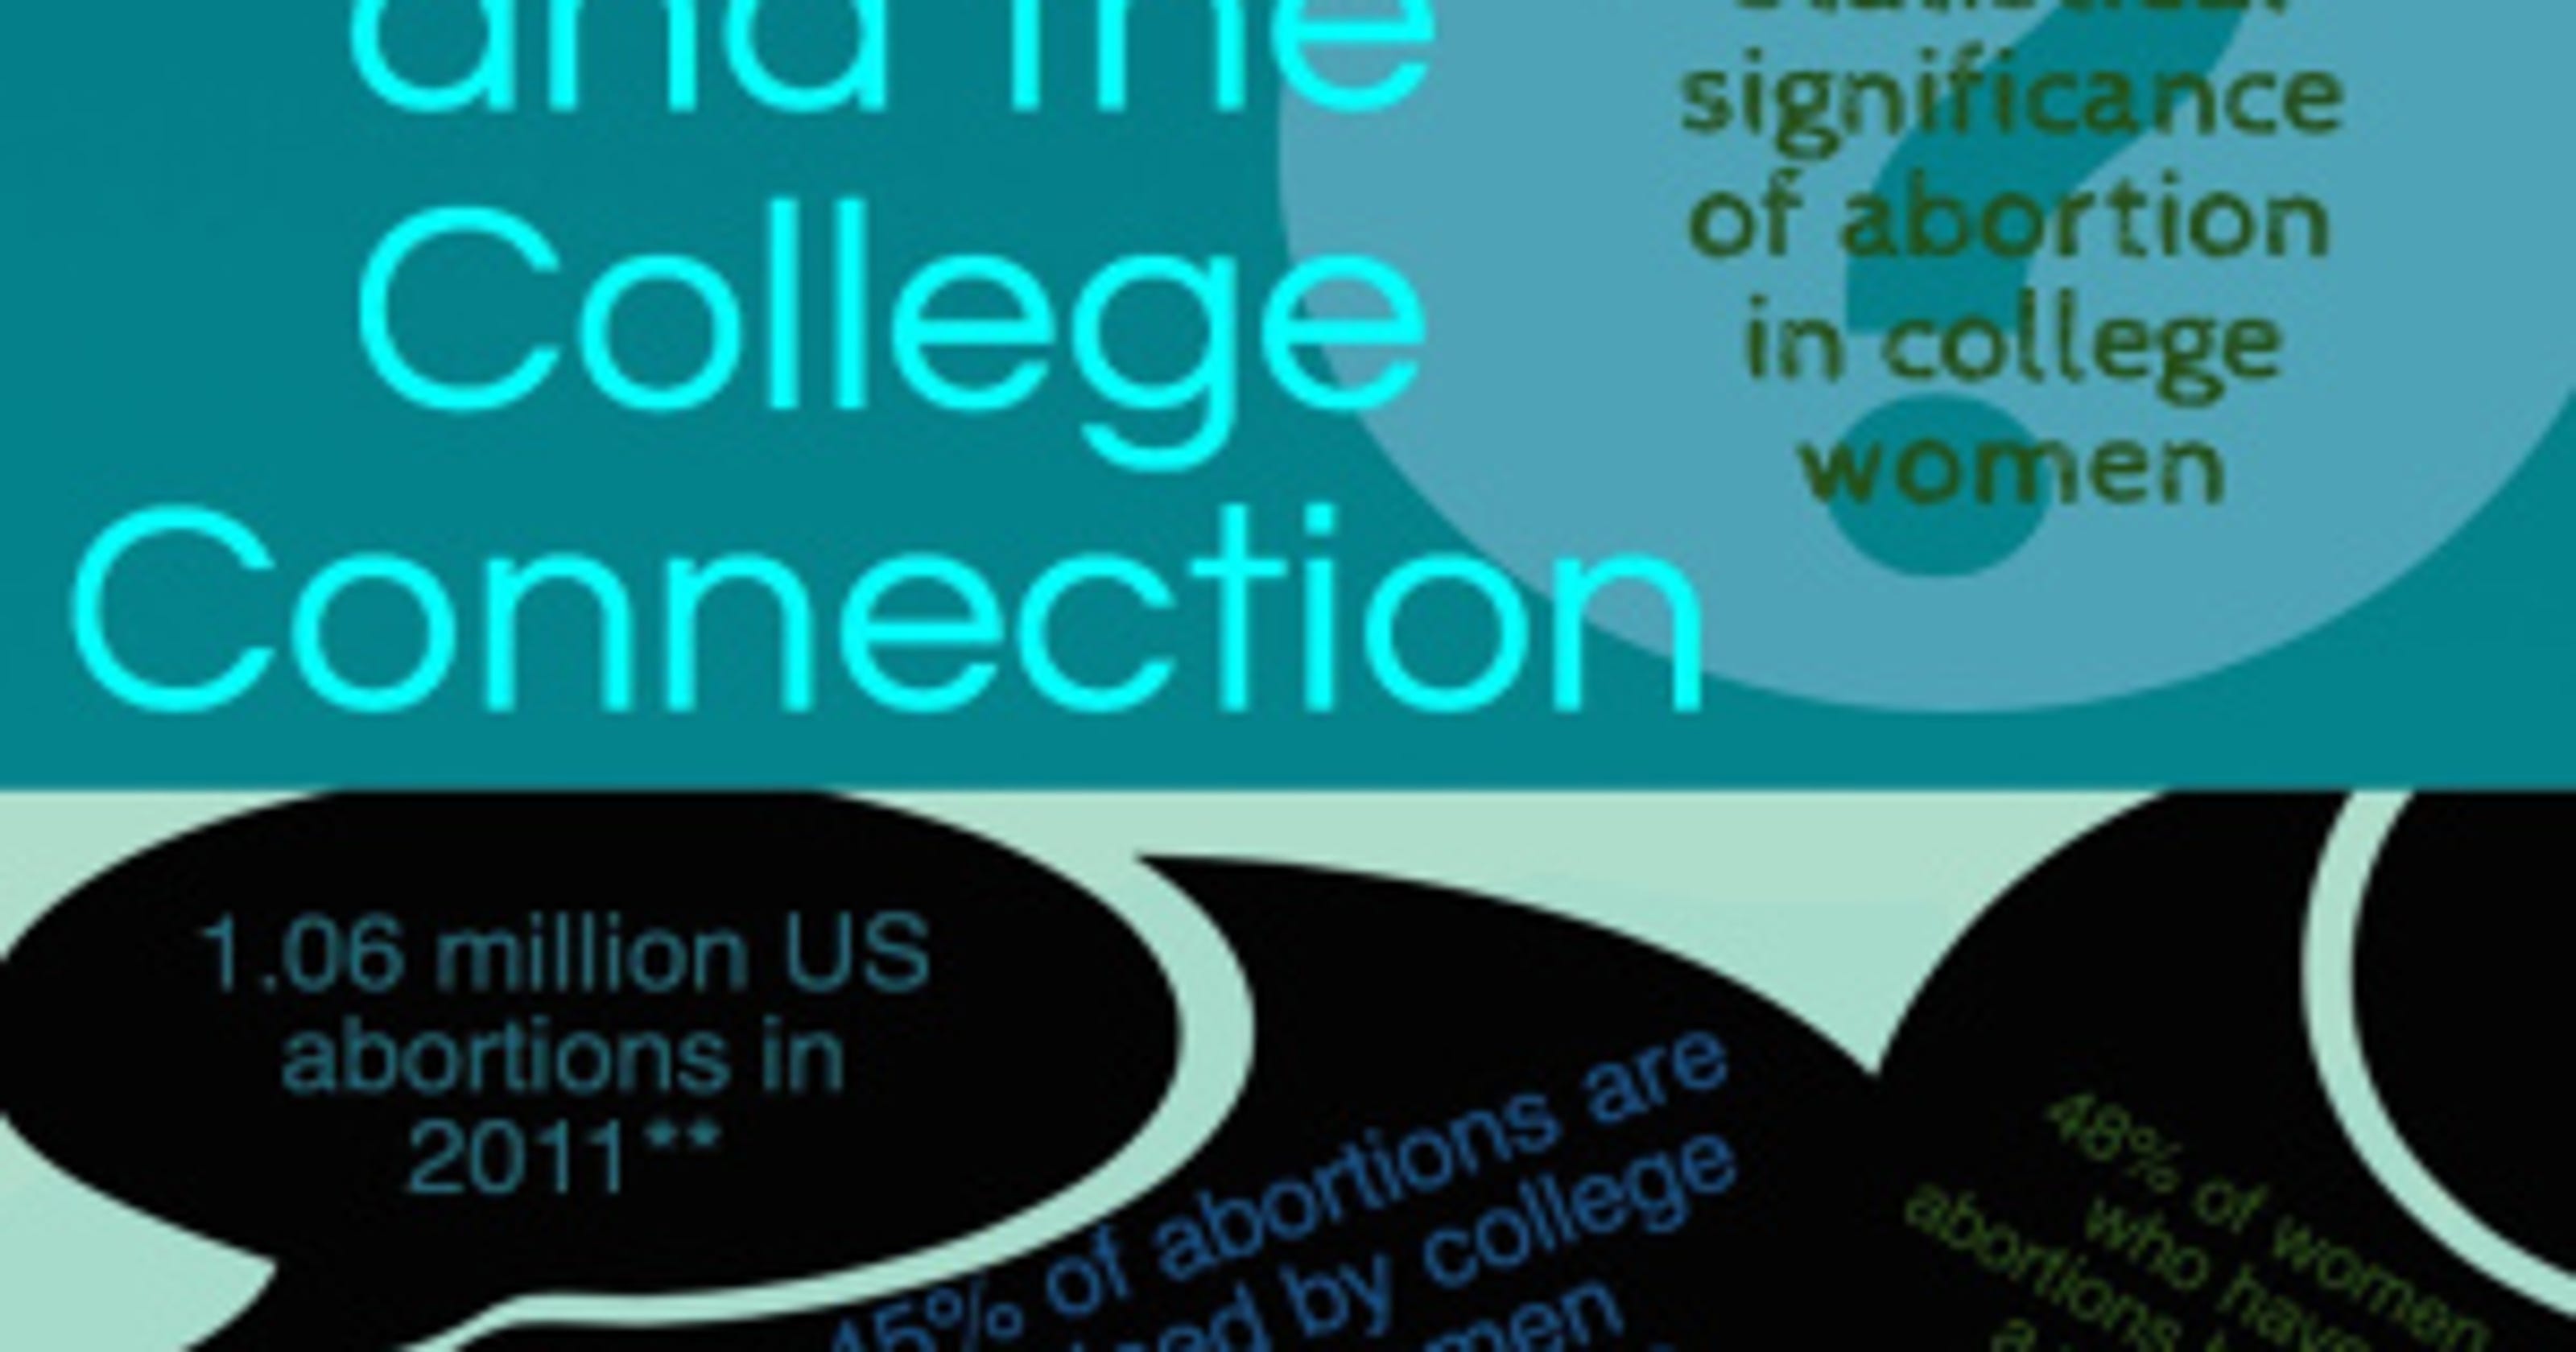 Ohio abortion bill creating controversy among college women